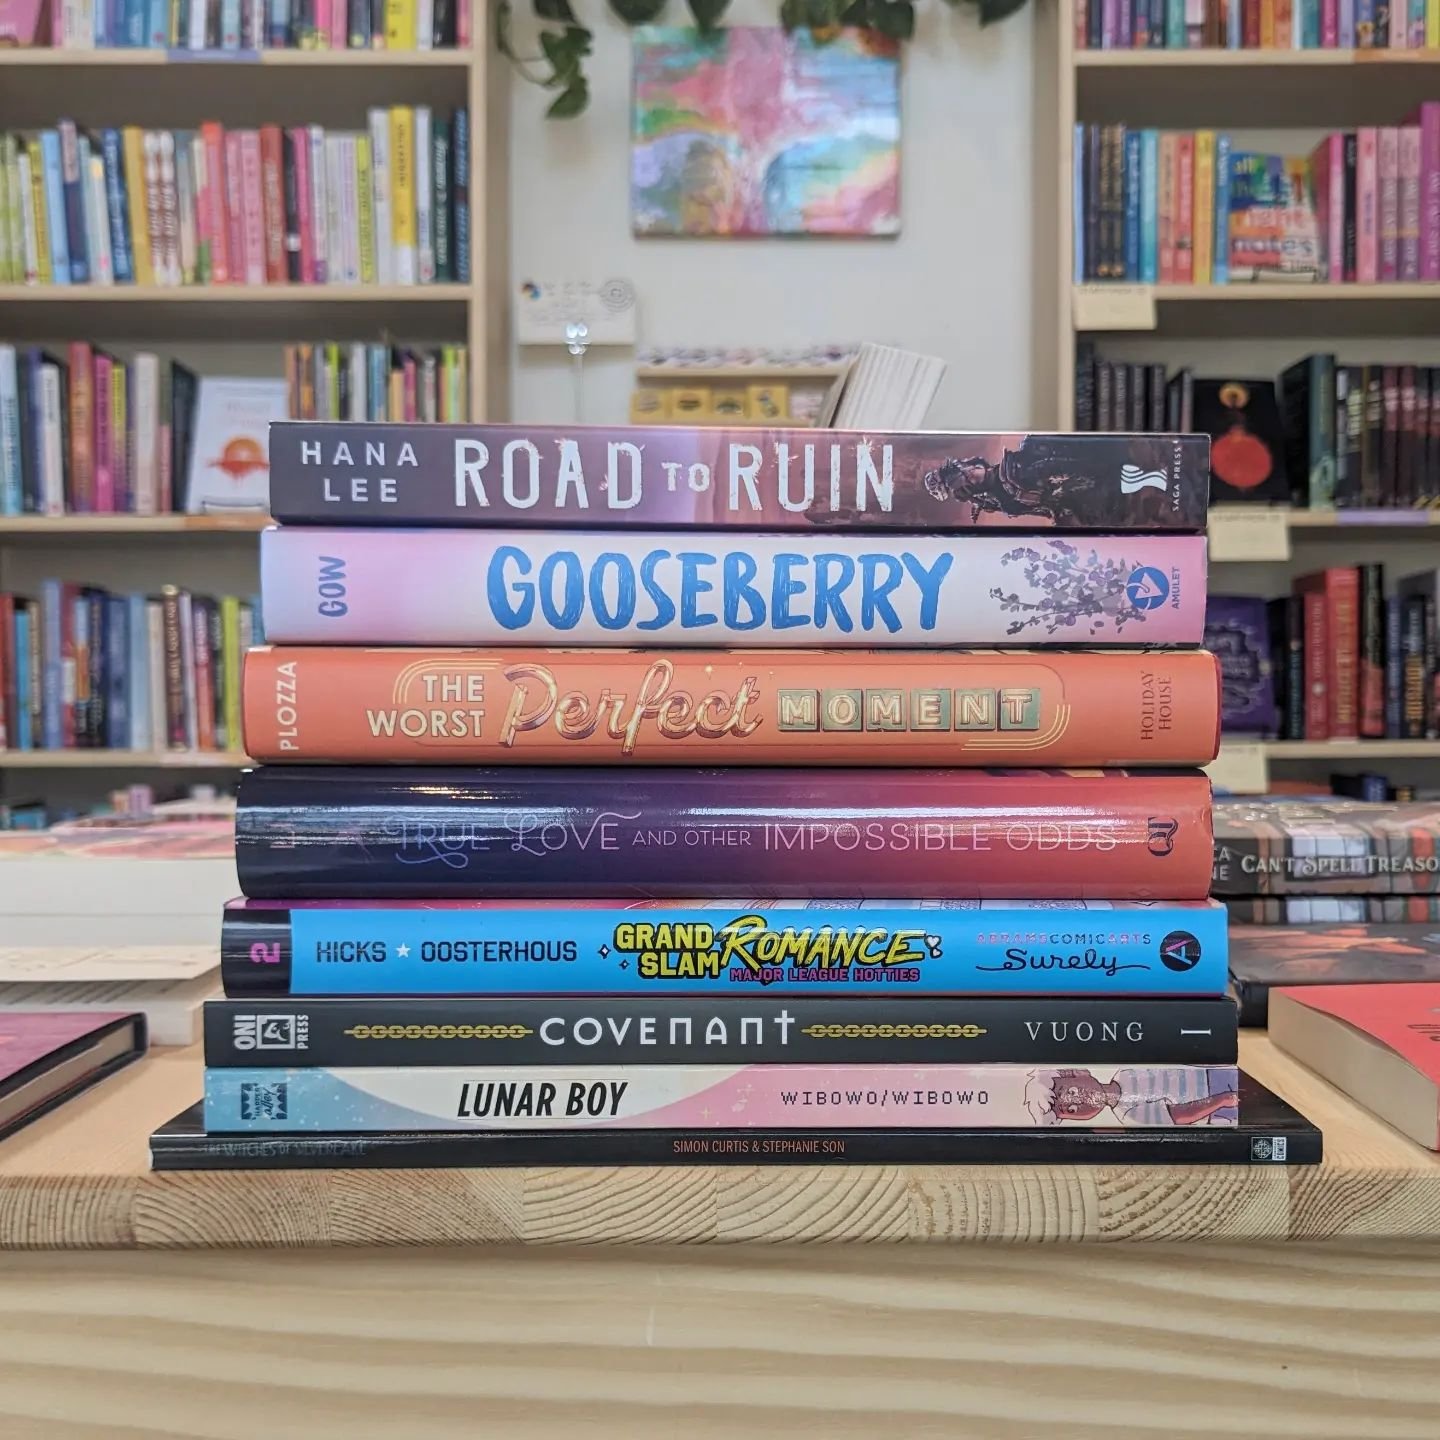 Neeeew week, neeeeww books!! 

Road to Ruin by Hana Lee
Gooseberry by Robin Gow
The Worst Perfect Moment by Shivaun Plozza
True Love and Other Impossible Odds by Christina Li
Grand Slam Romance 2 by Ollie Hicks &amp; Emma Oosterhous
Covenant by LySan